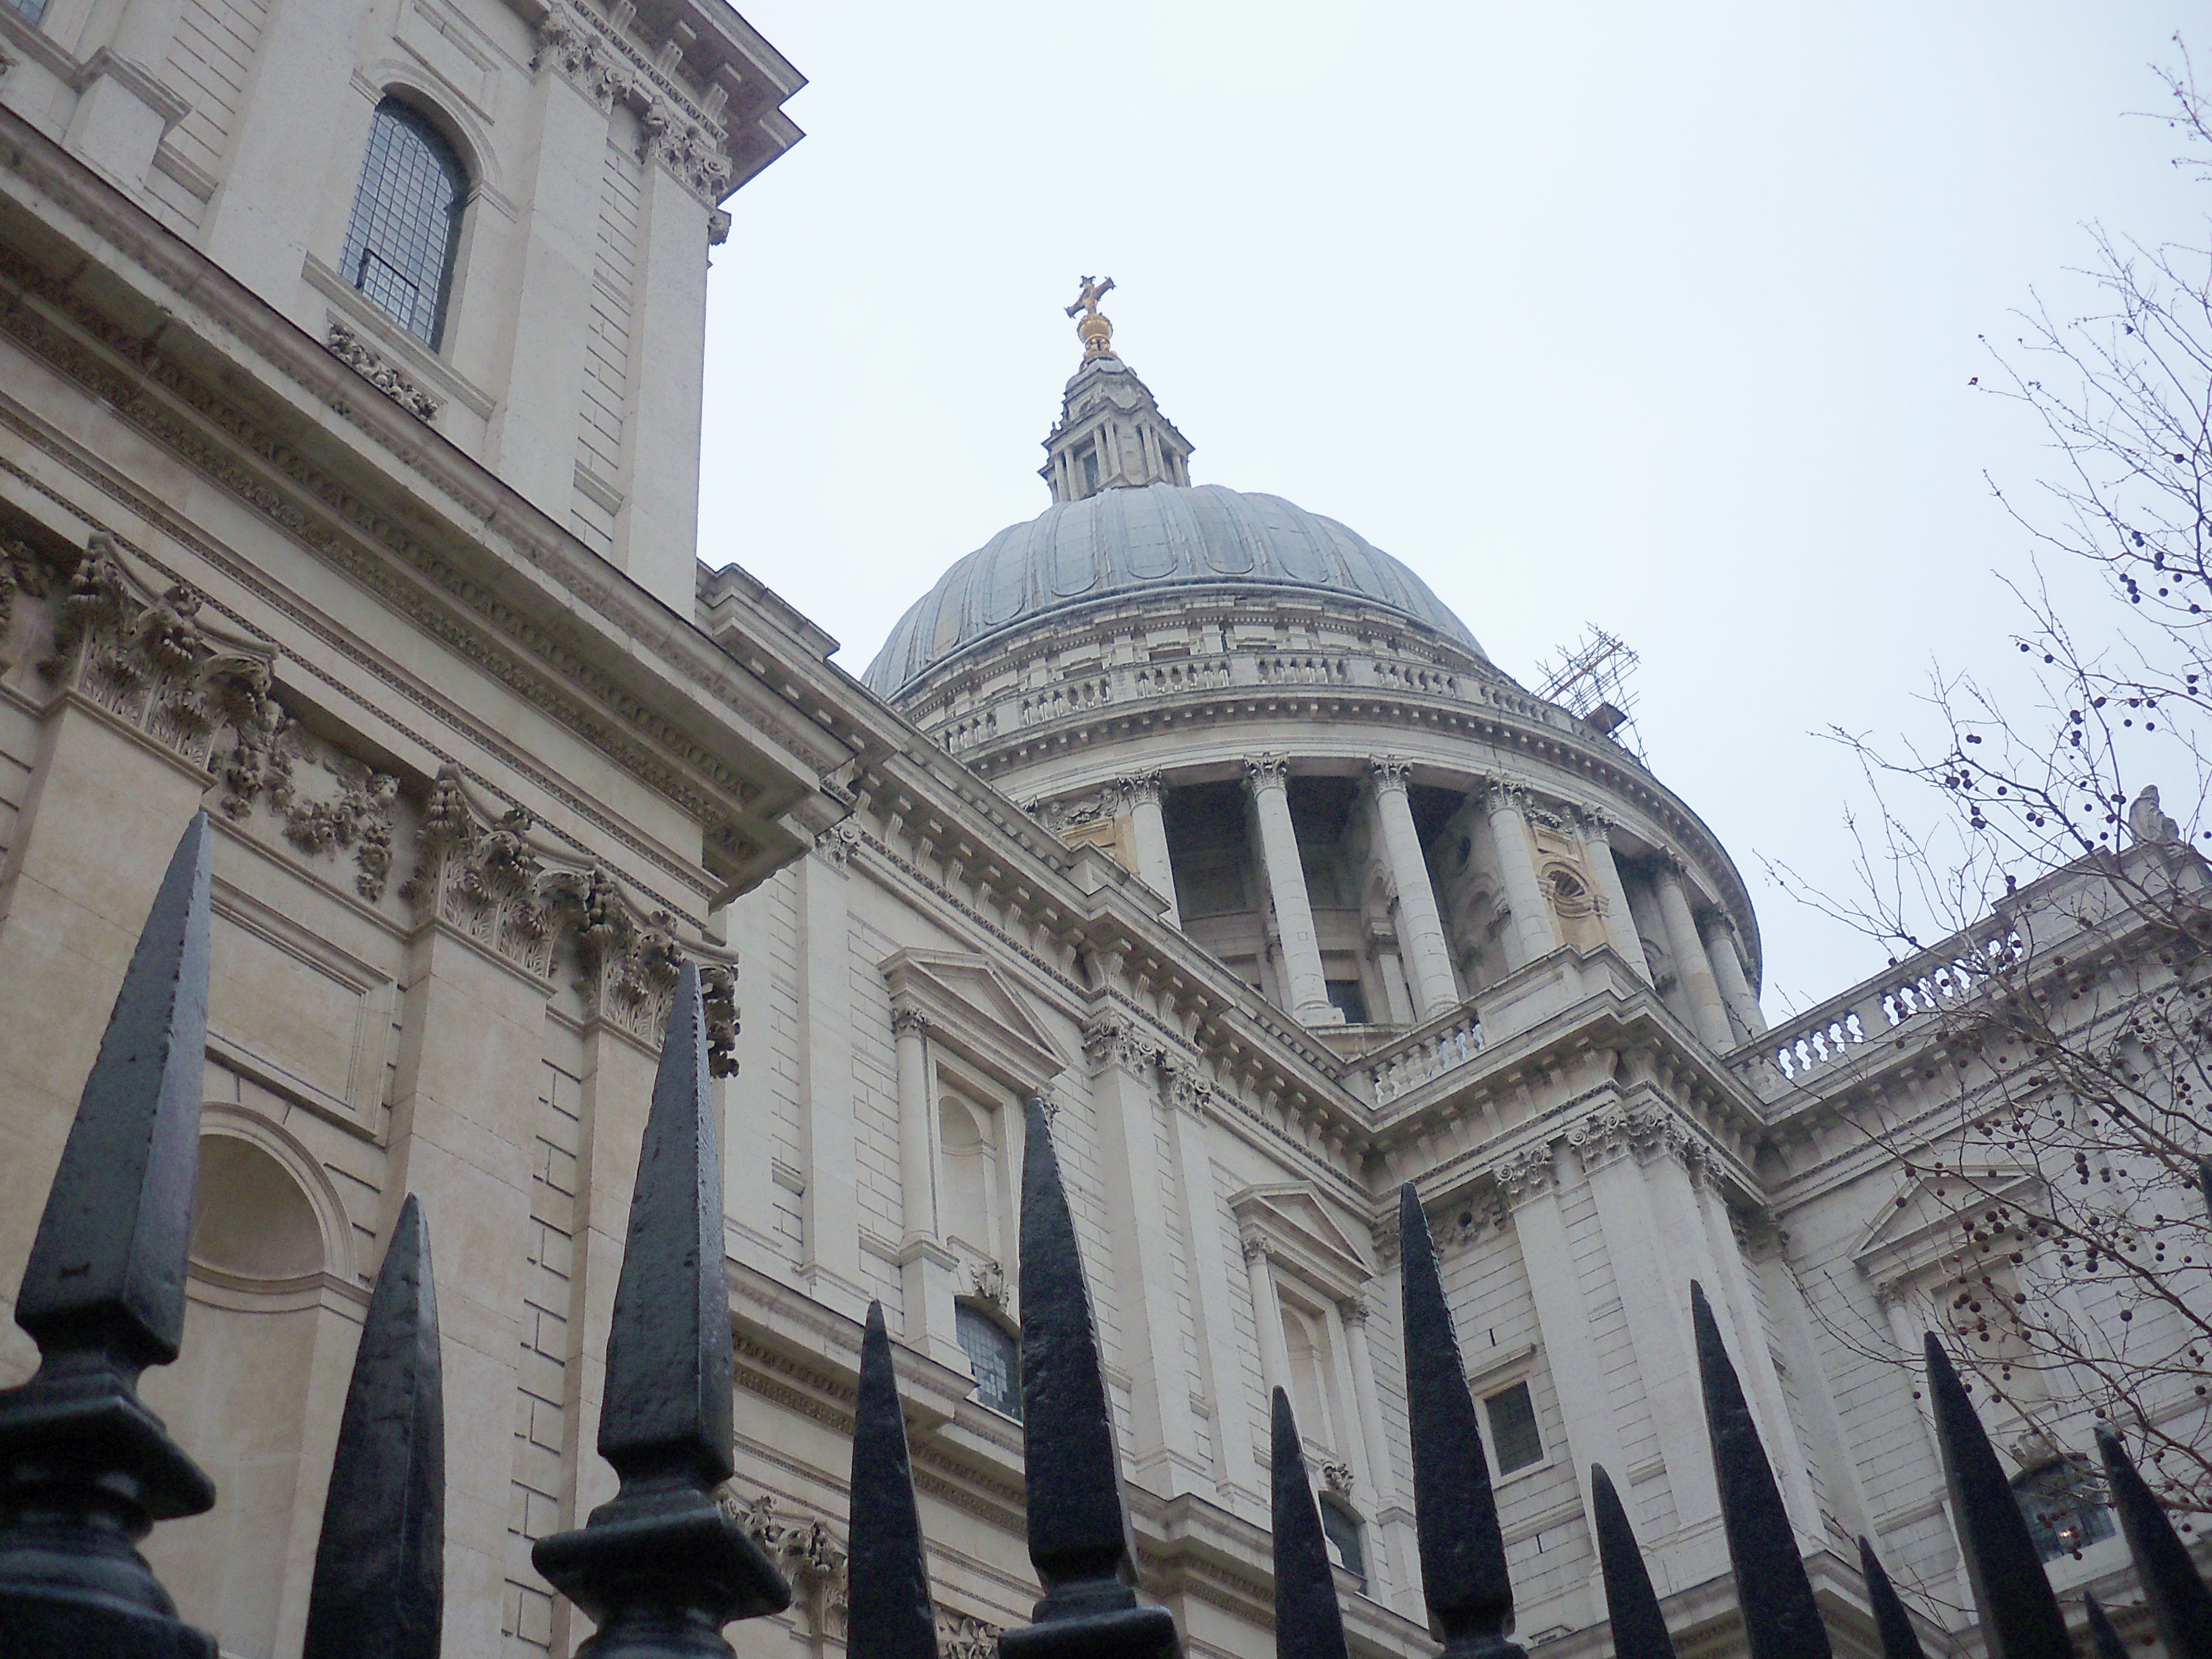 St pauls cathedral (1).JPG